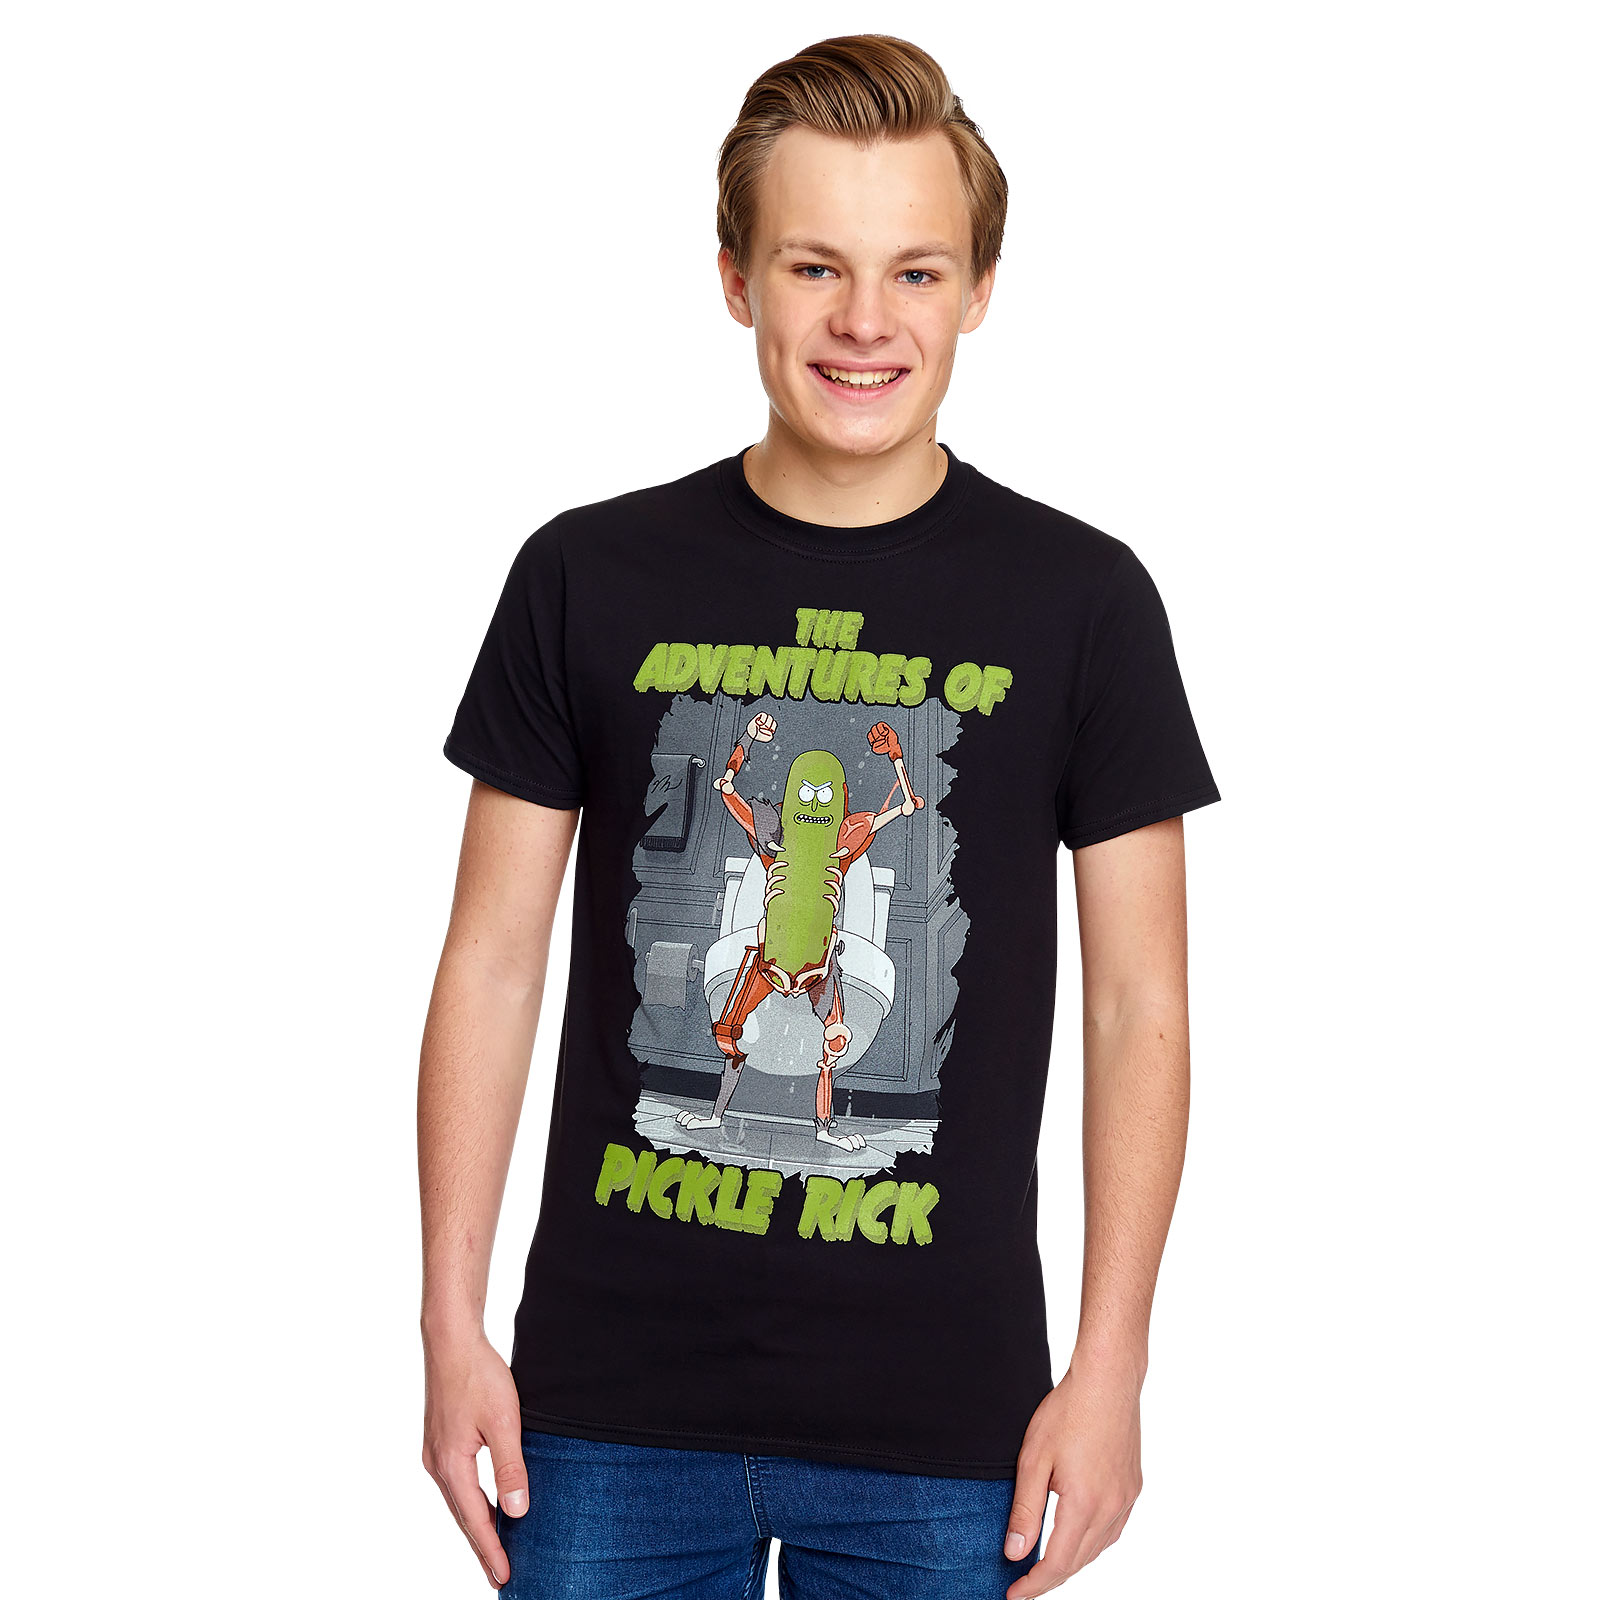 Rick and Morty - Adventures of Pickle Rick T-Shirt schwarz